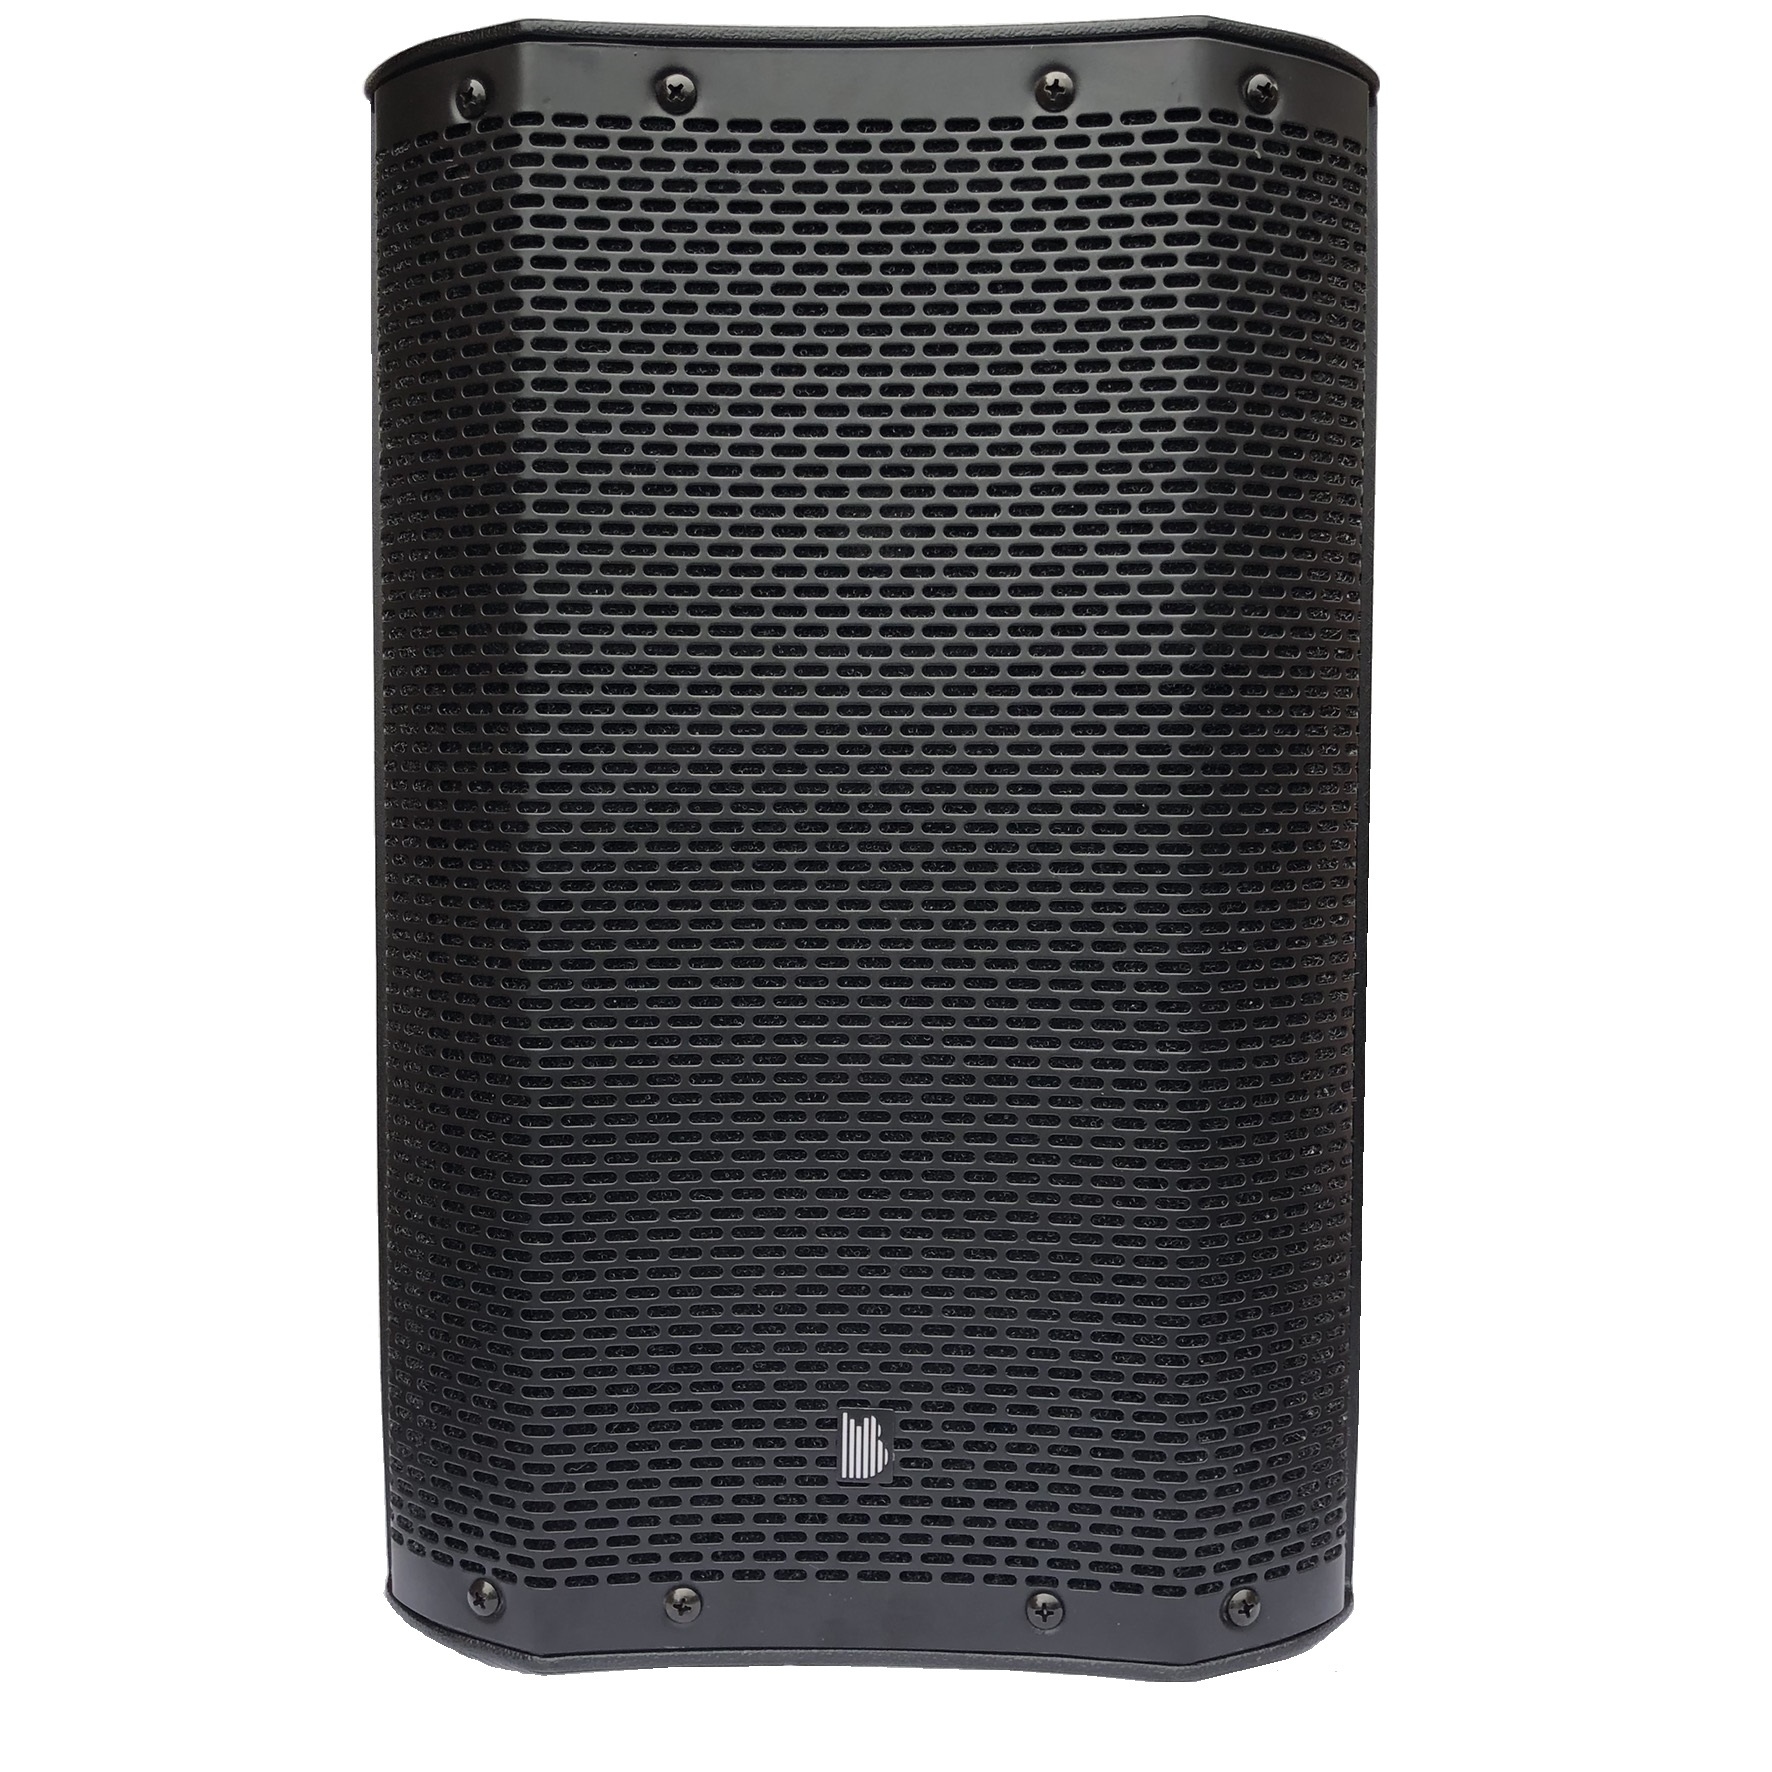 Orion 8" Active DSP 300w RMS Full Range Speaker With DSP and TWS Stereo Bluetooth (11)